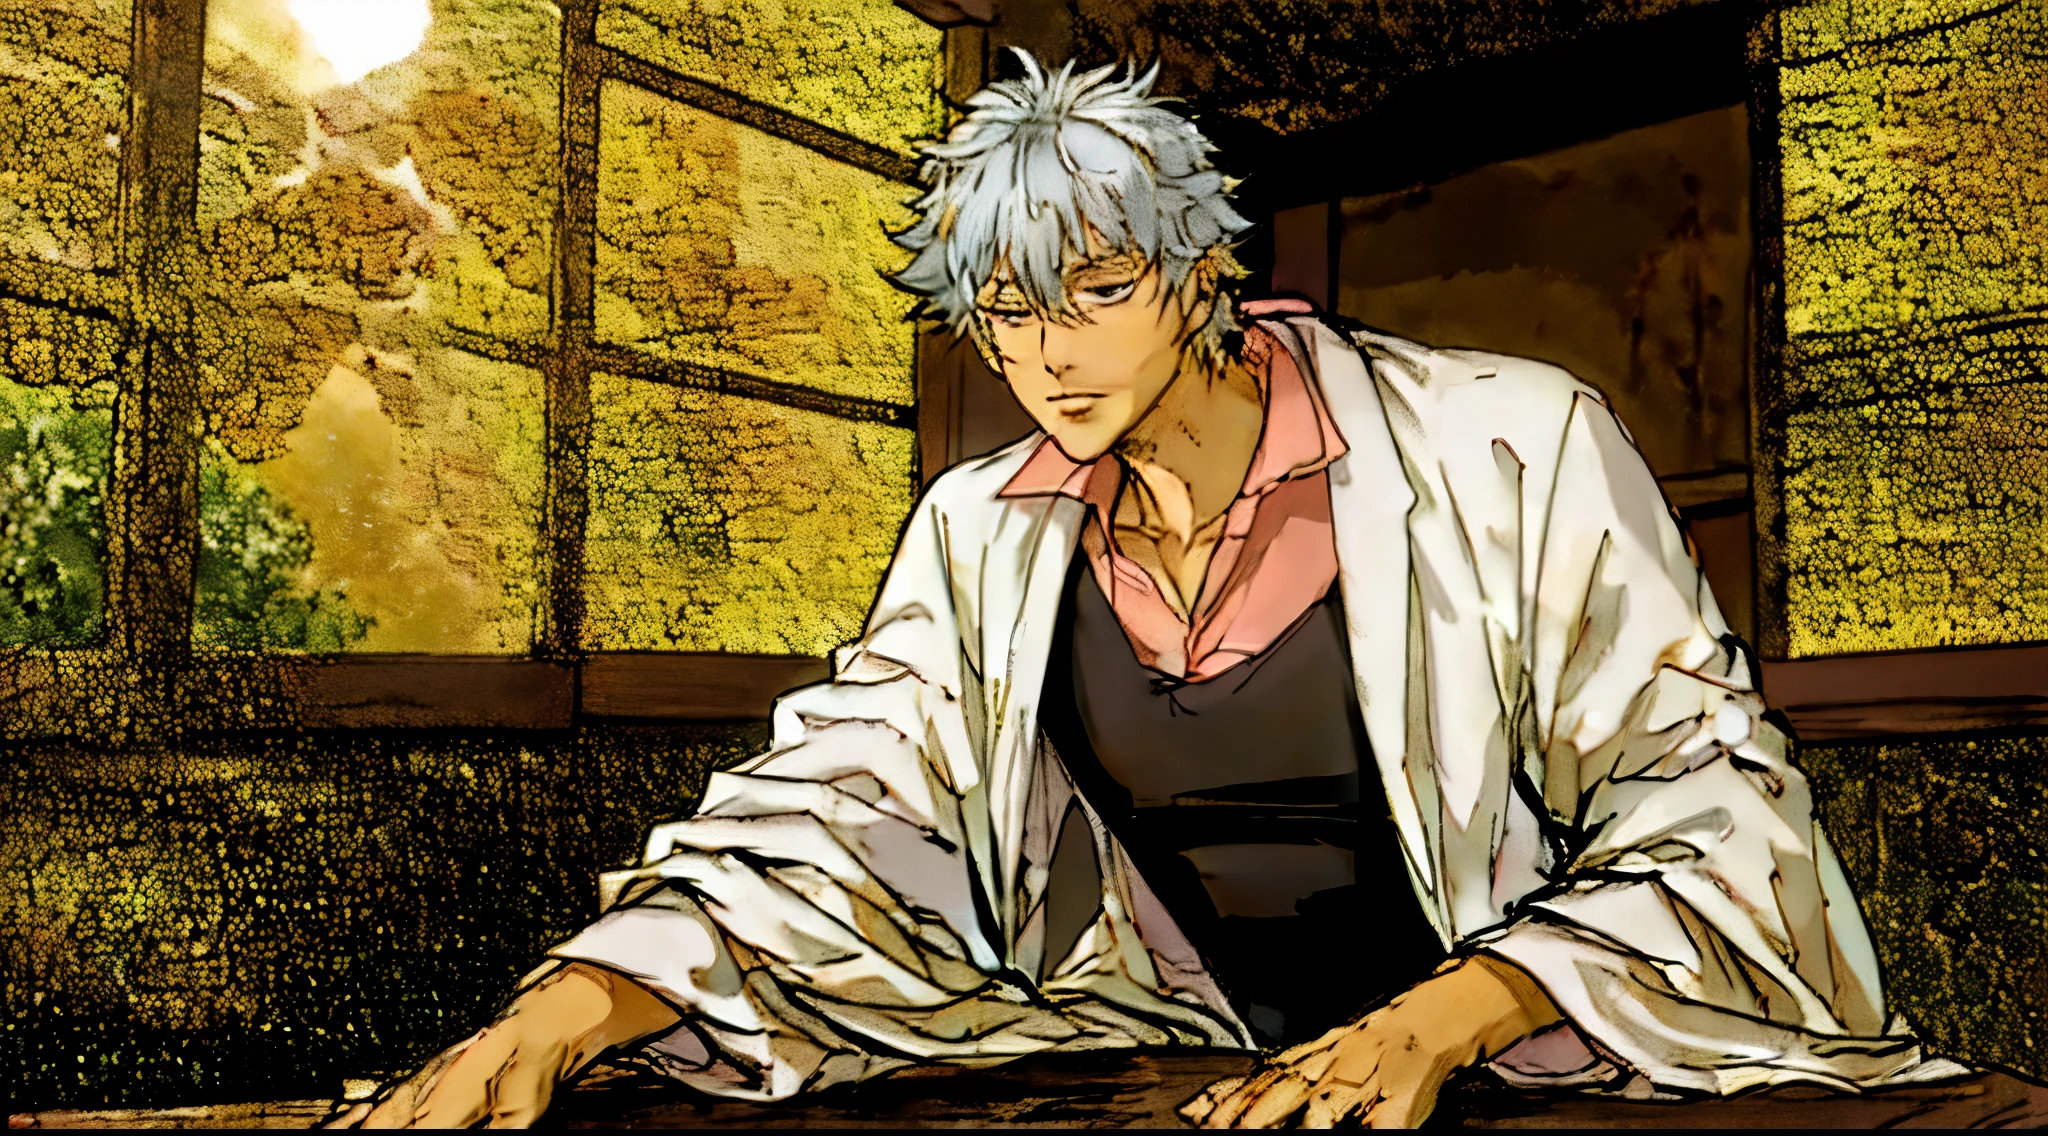 Silver haired guy is talking while his hands are placed on a table, he is leaning forward while speaking loudly, he is talking to the viewer